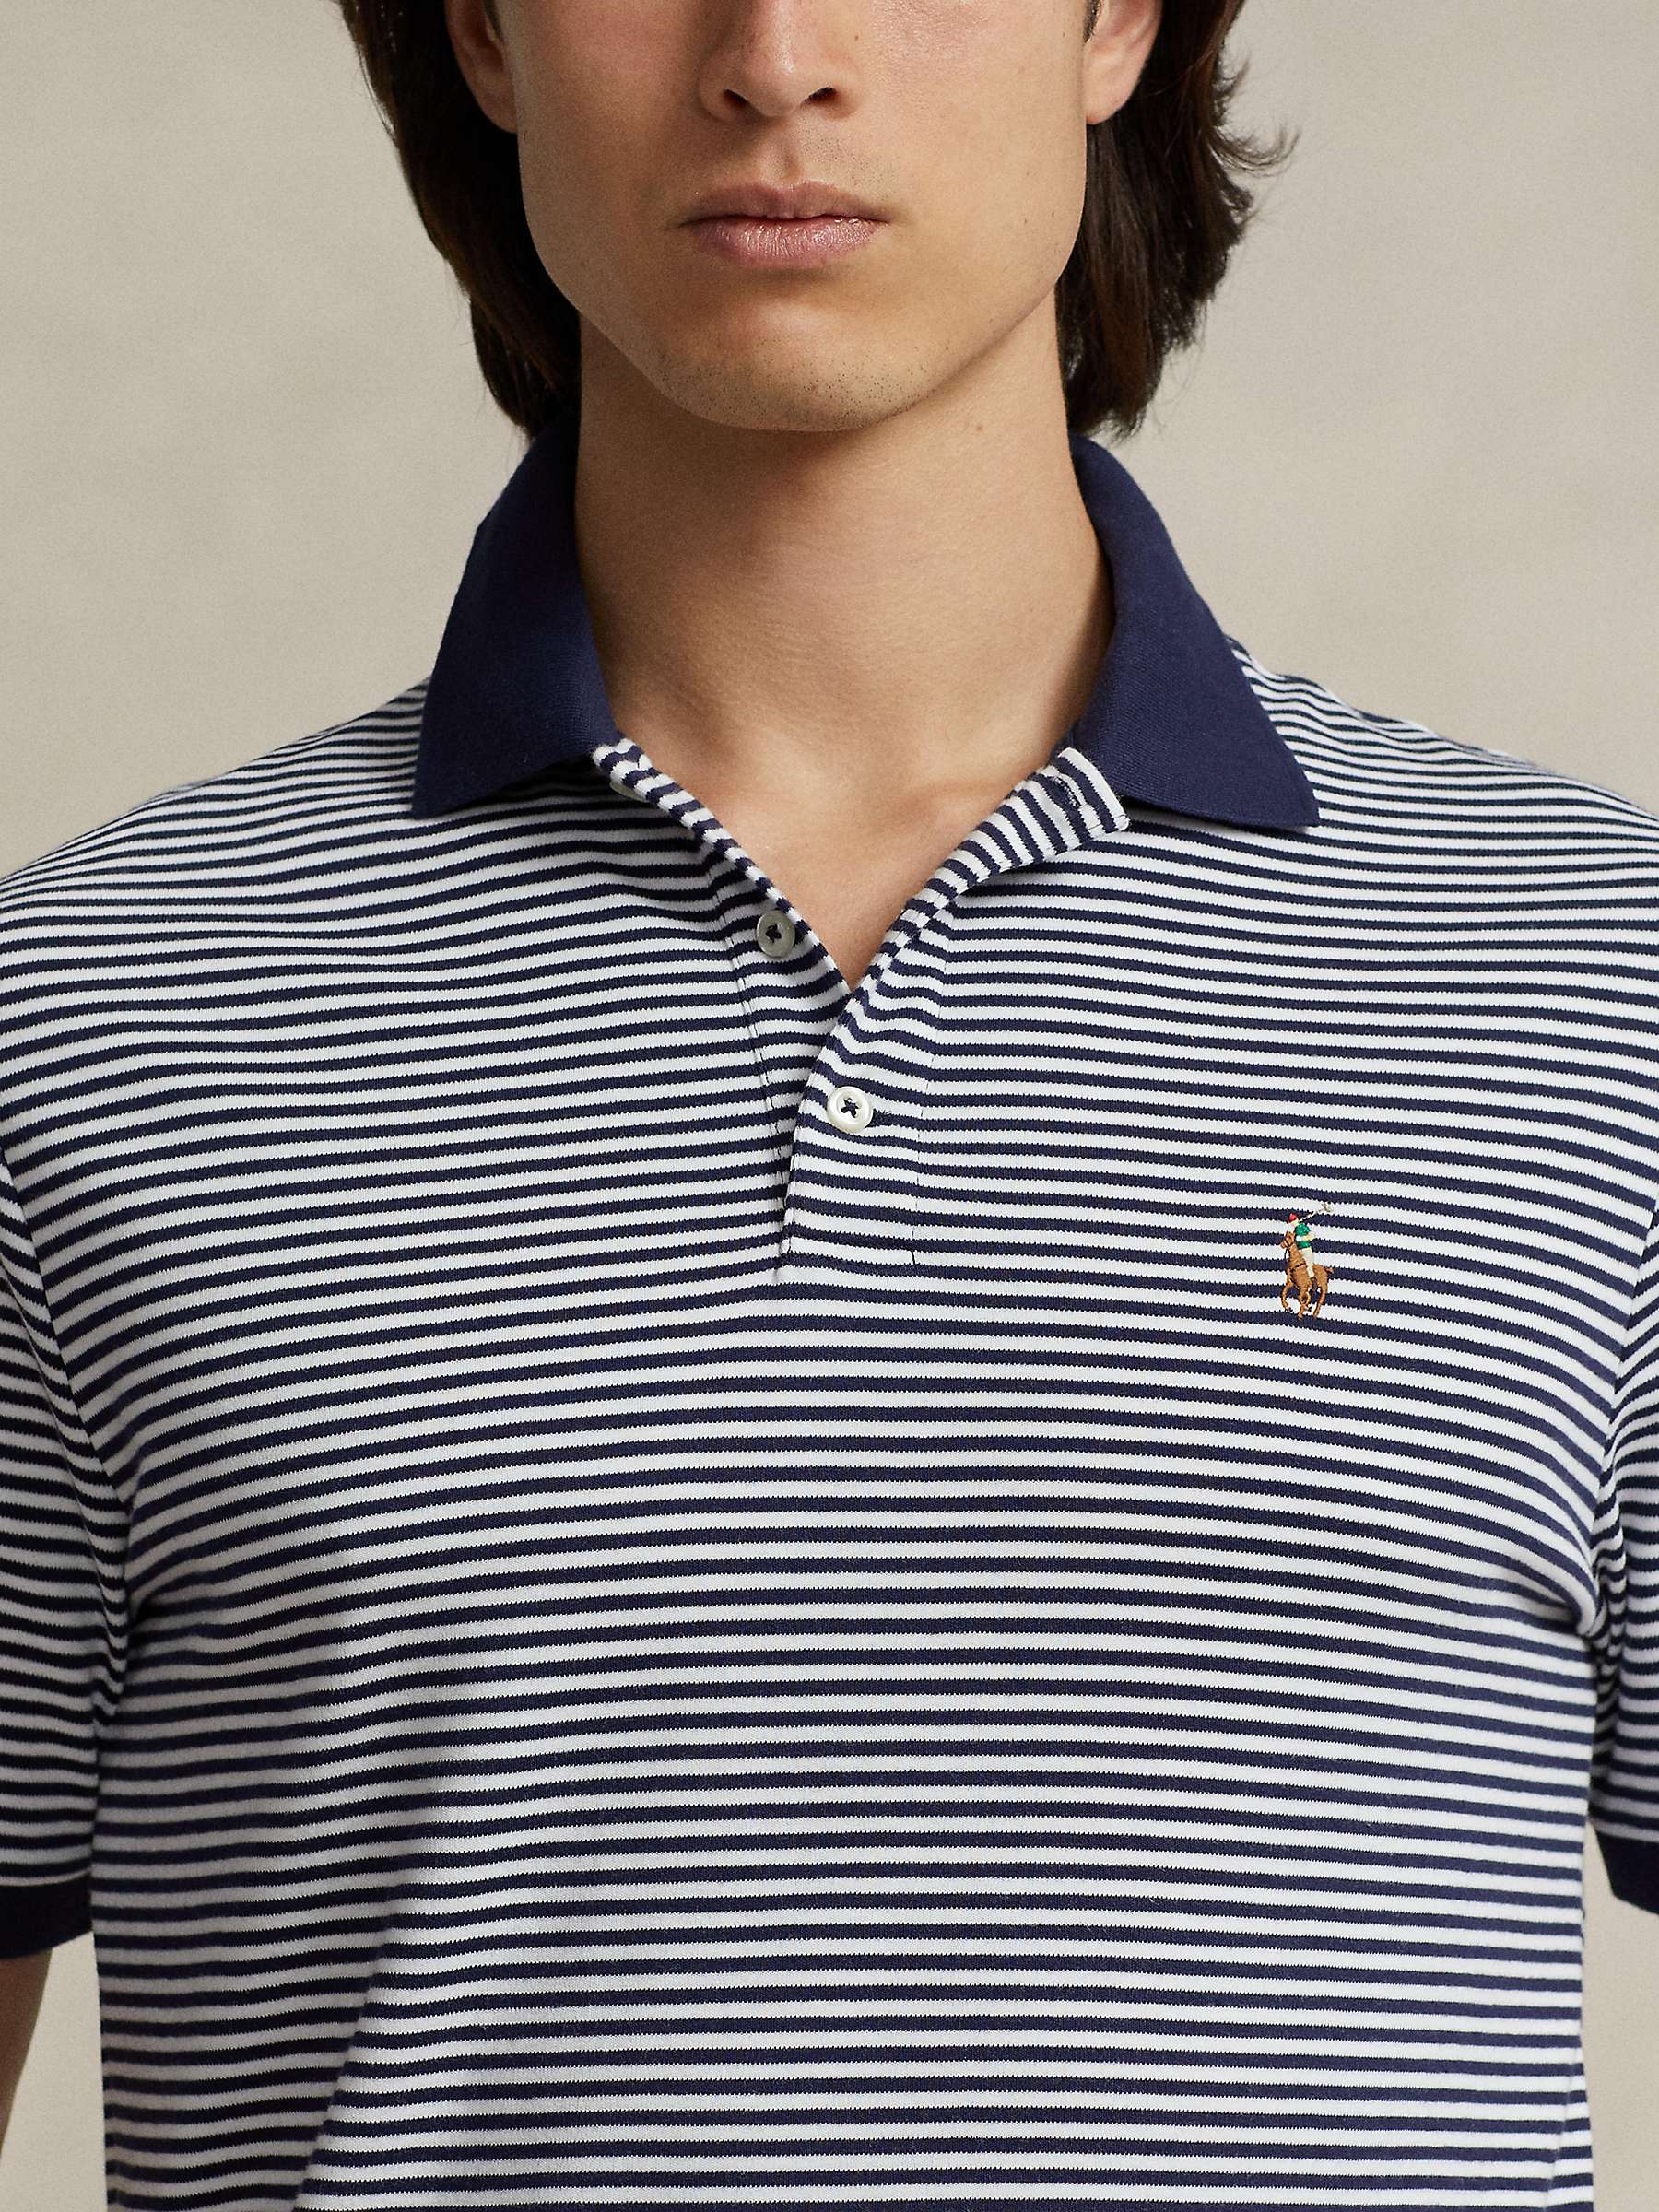 Buy Polo Ralph Lauren Short Sleeve Striped Polo Shirt, Refined Navy/White Online at johnlewis.com